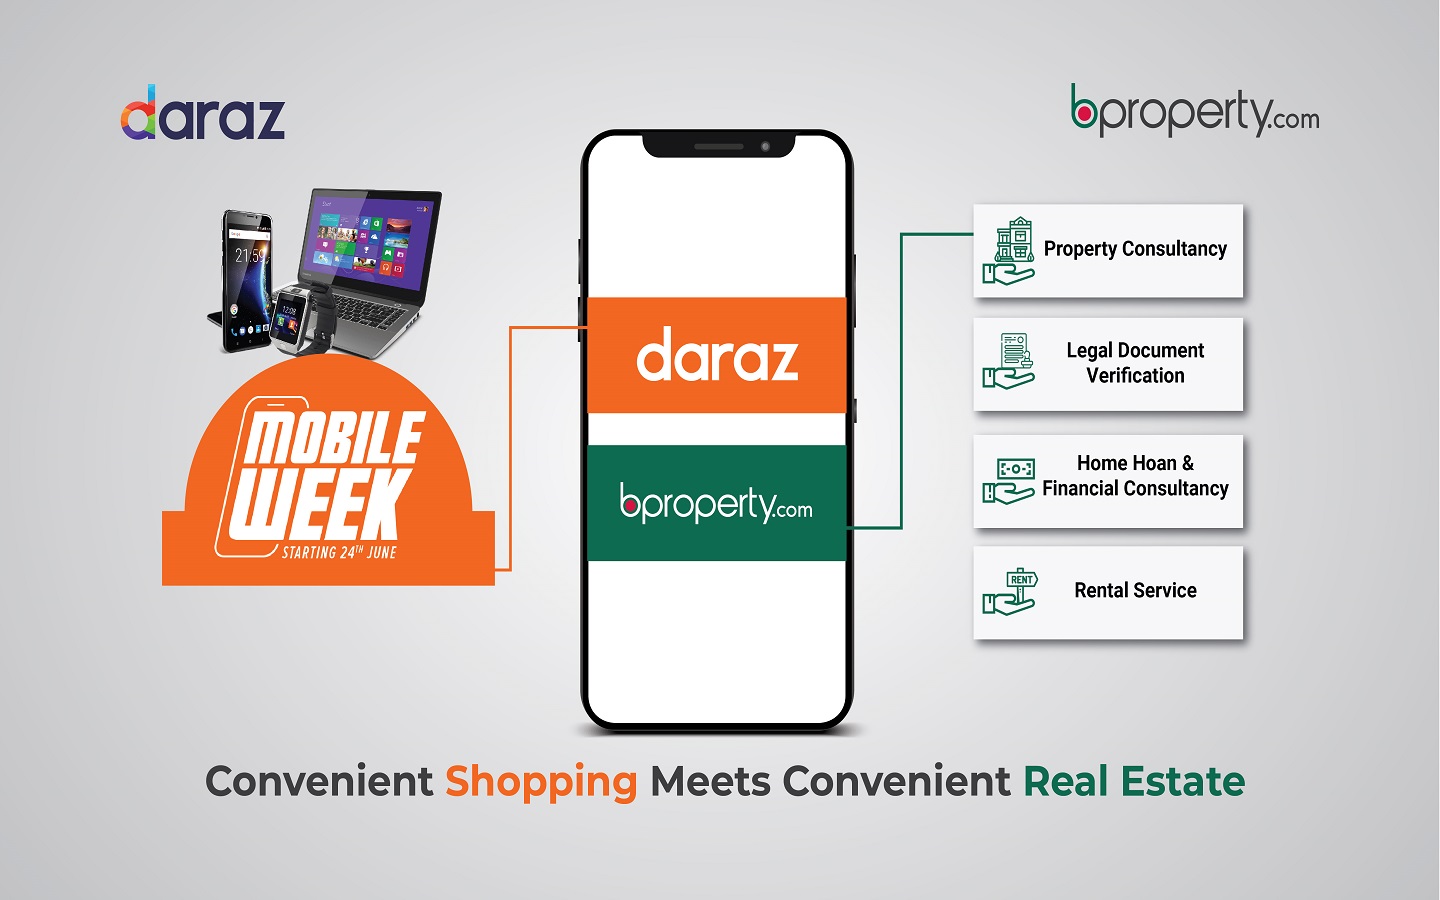 Daraz and Bproperty have partnered for the Mobile Week 2019